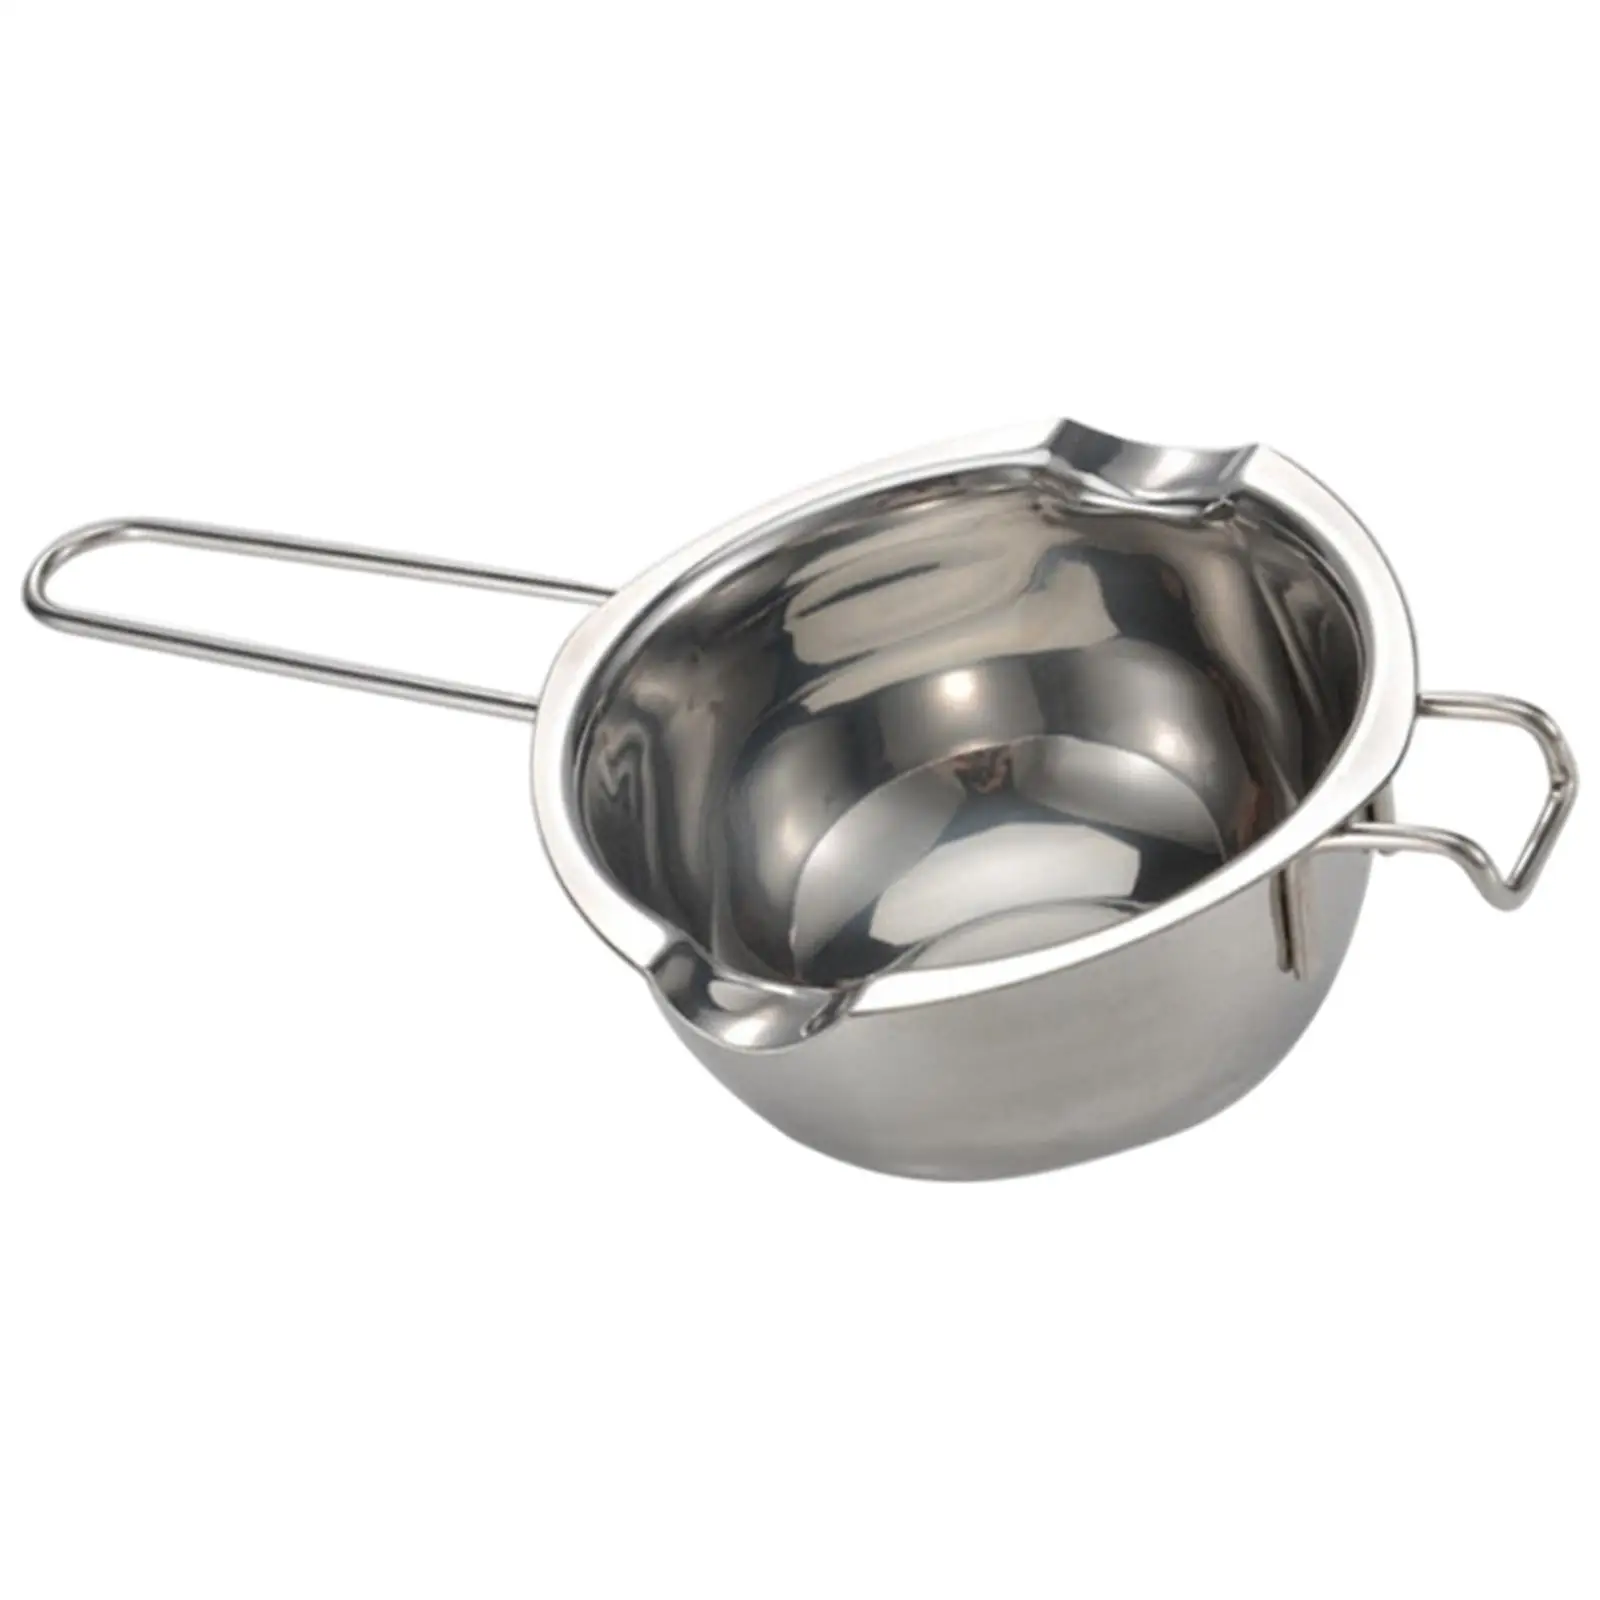 600ml Stainless Steel Double Boiler Pot for Melting Chocolate, Candy, Candle Sturdy